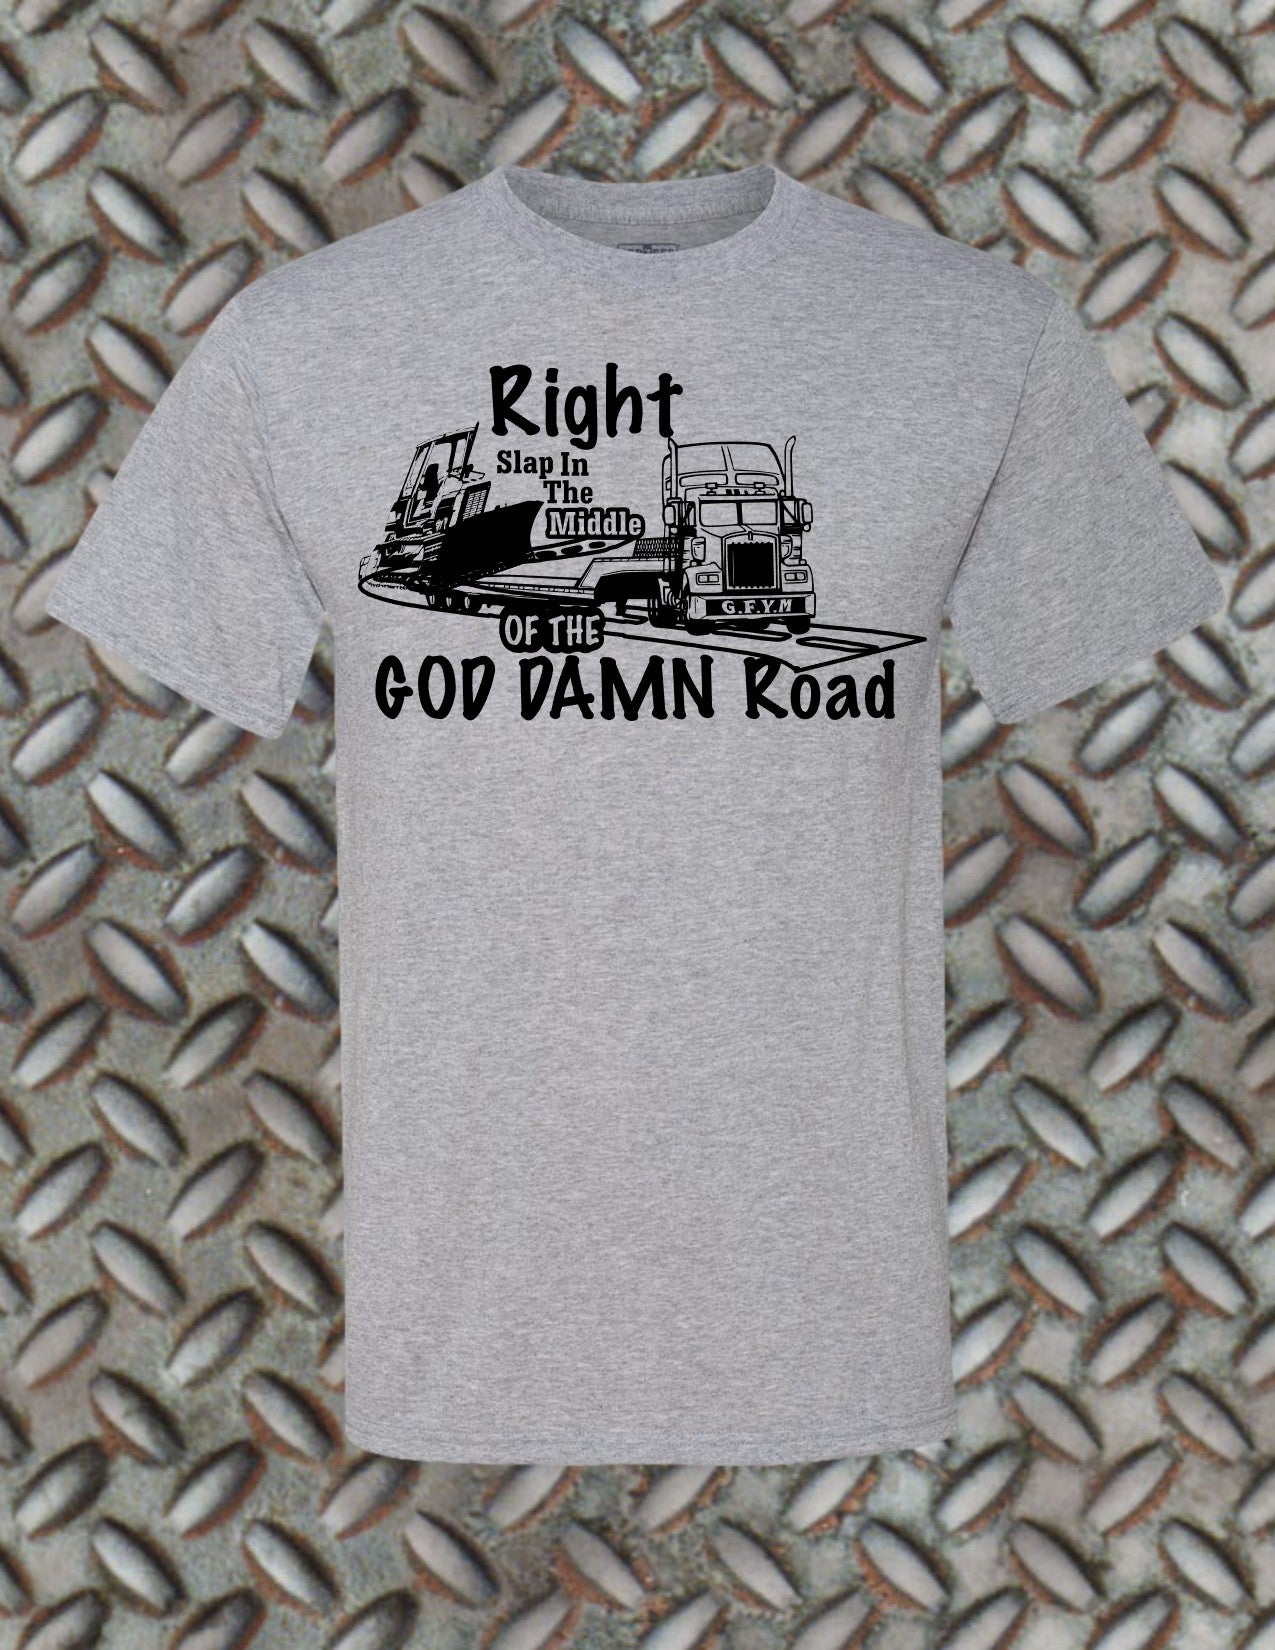 G.F.Y.M  Smack in the middle of the GOD DAMN Road Classic Tee